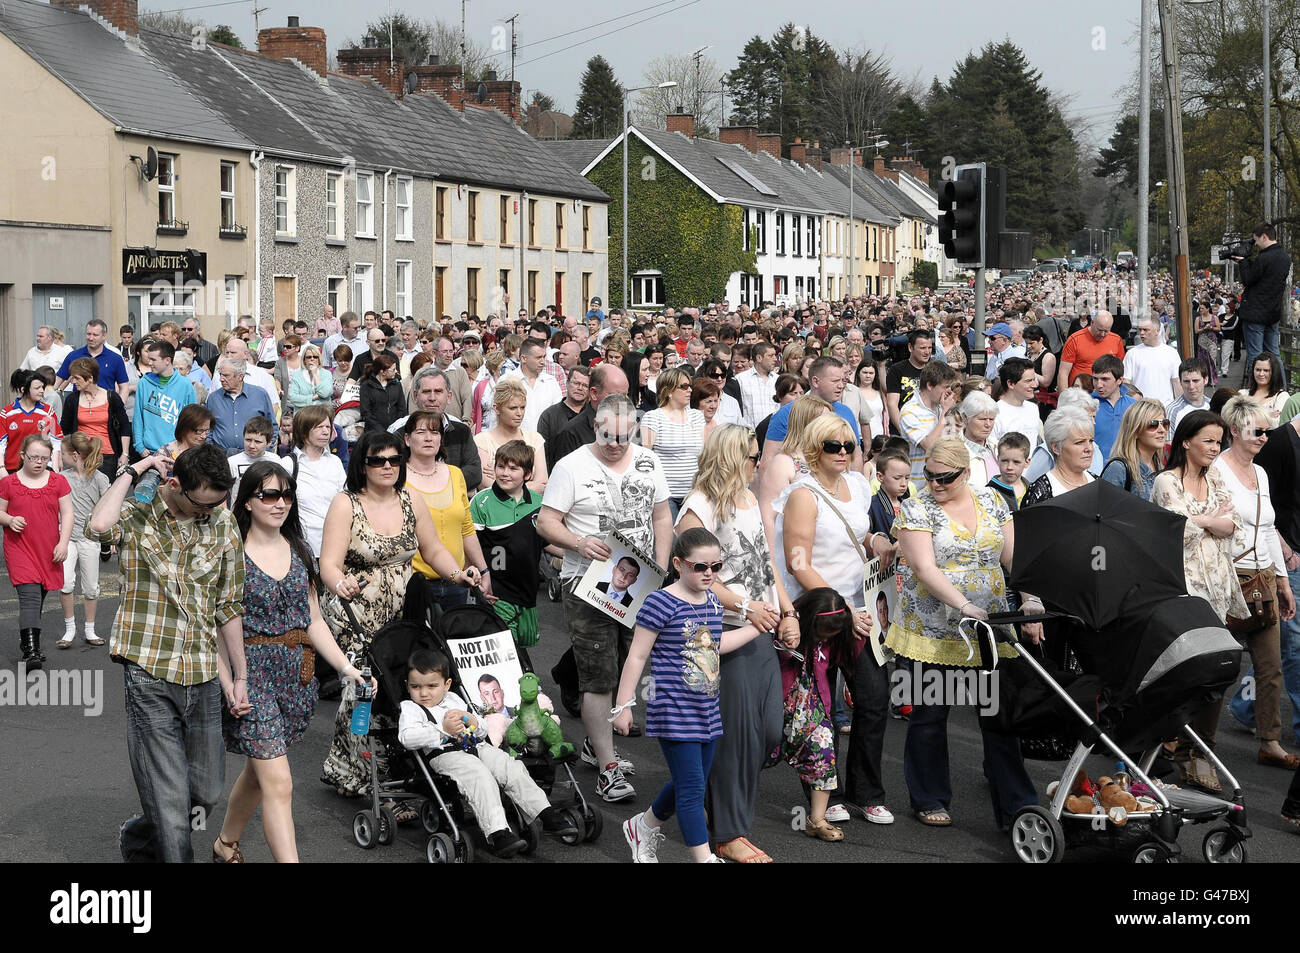 Thousands of people gather in Omagh for a peace walk to mark the death of Northern Ireland police officer Ronan Kerr, who was killed in a car bomb explosion. Stock Photo